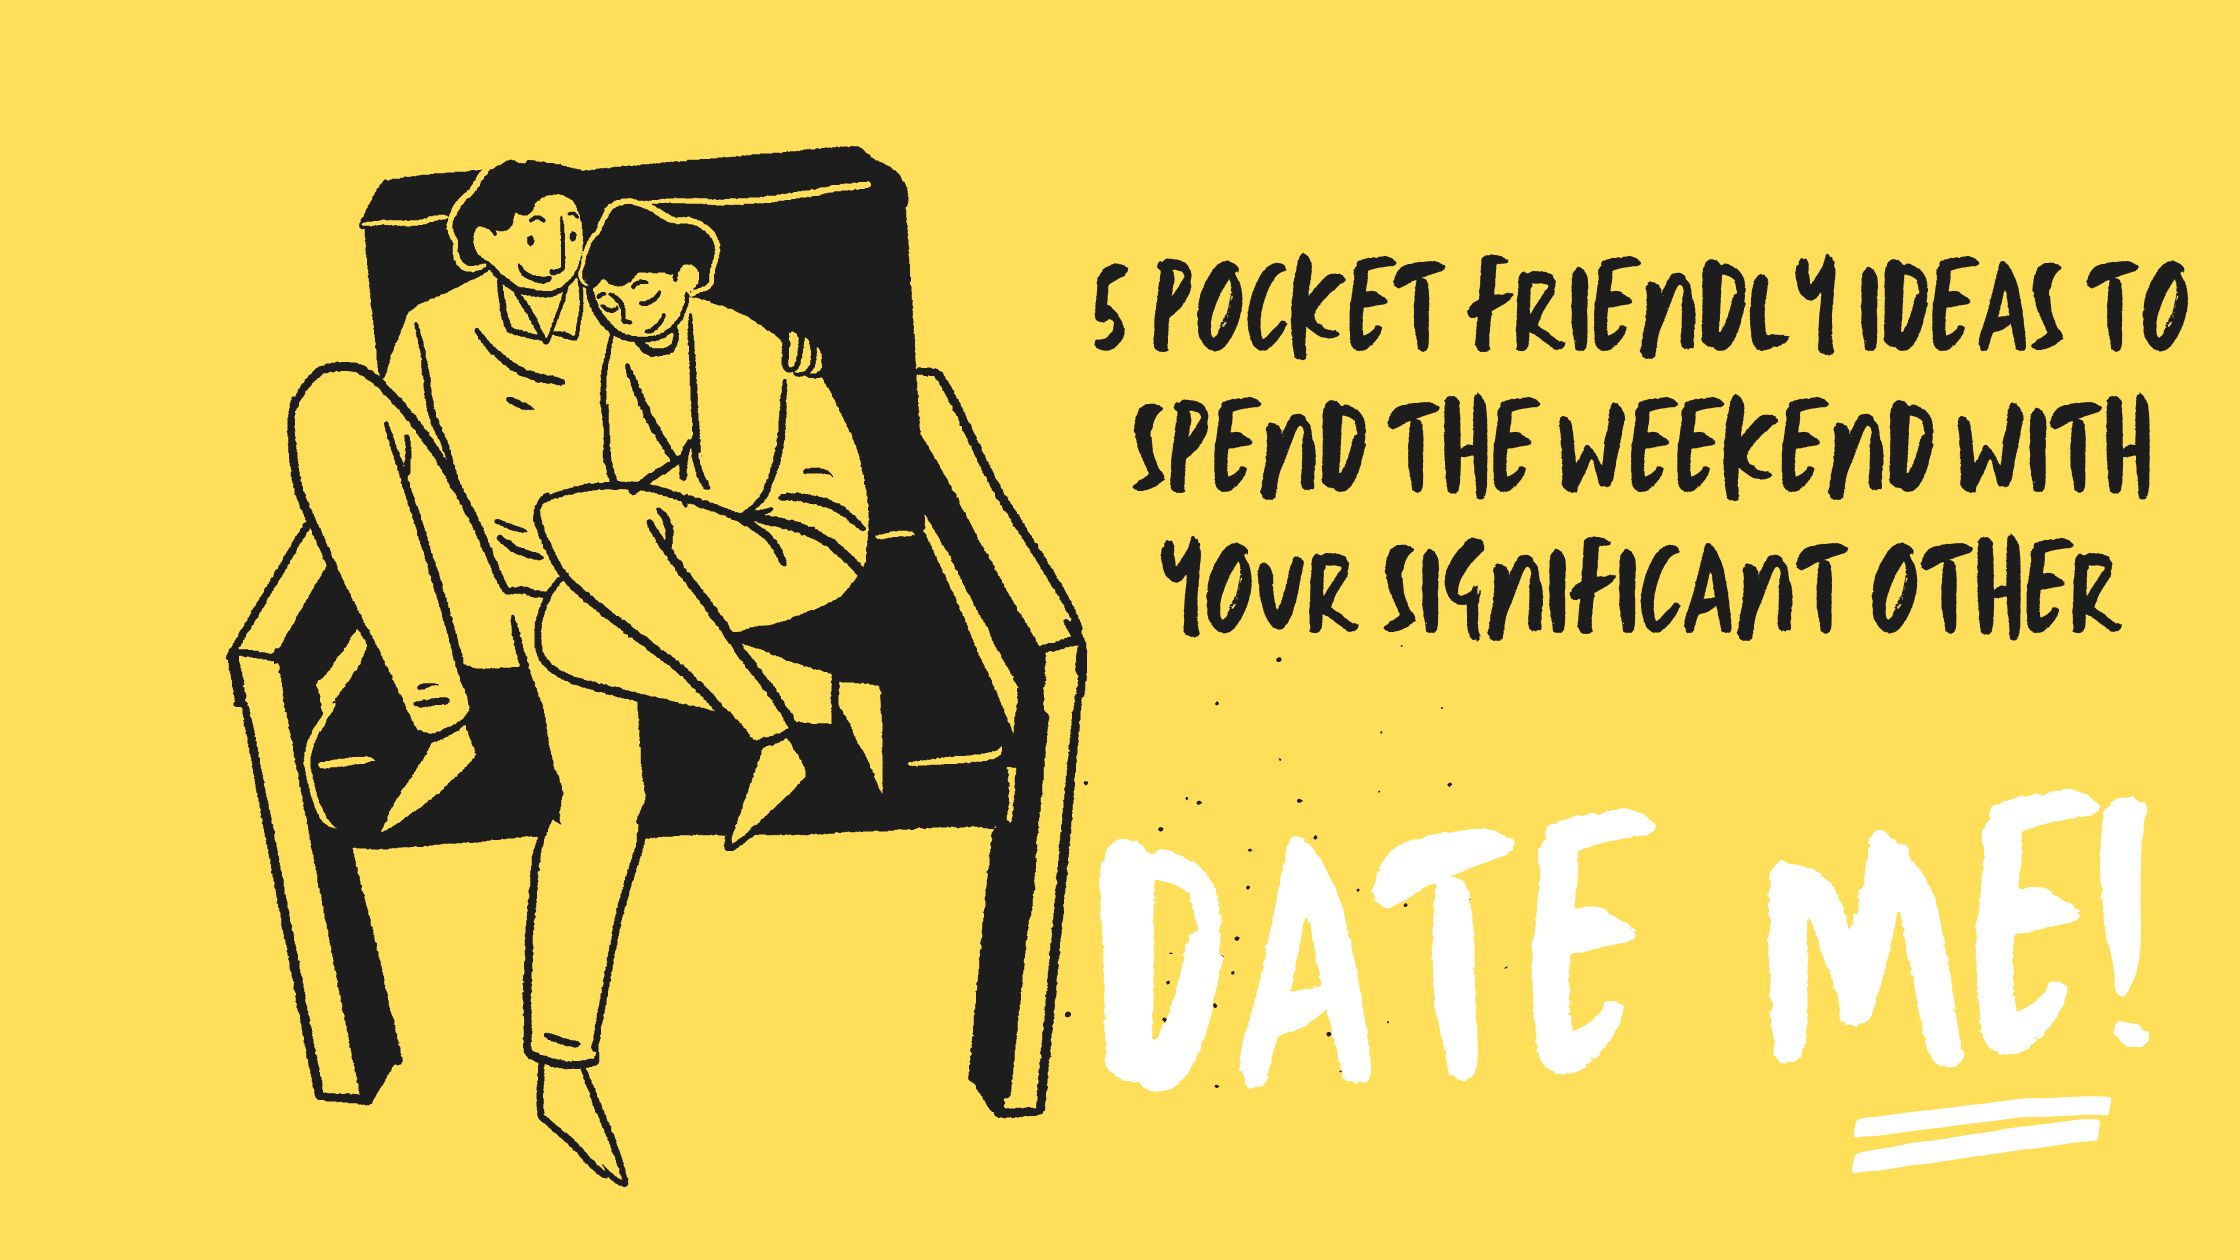 5 pocket friendly ideas to spend the weekend with your significant other